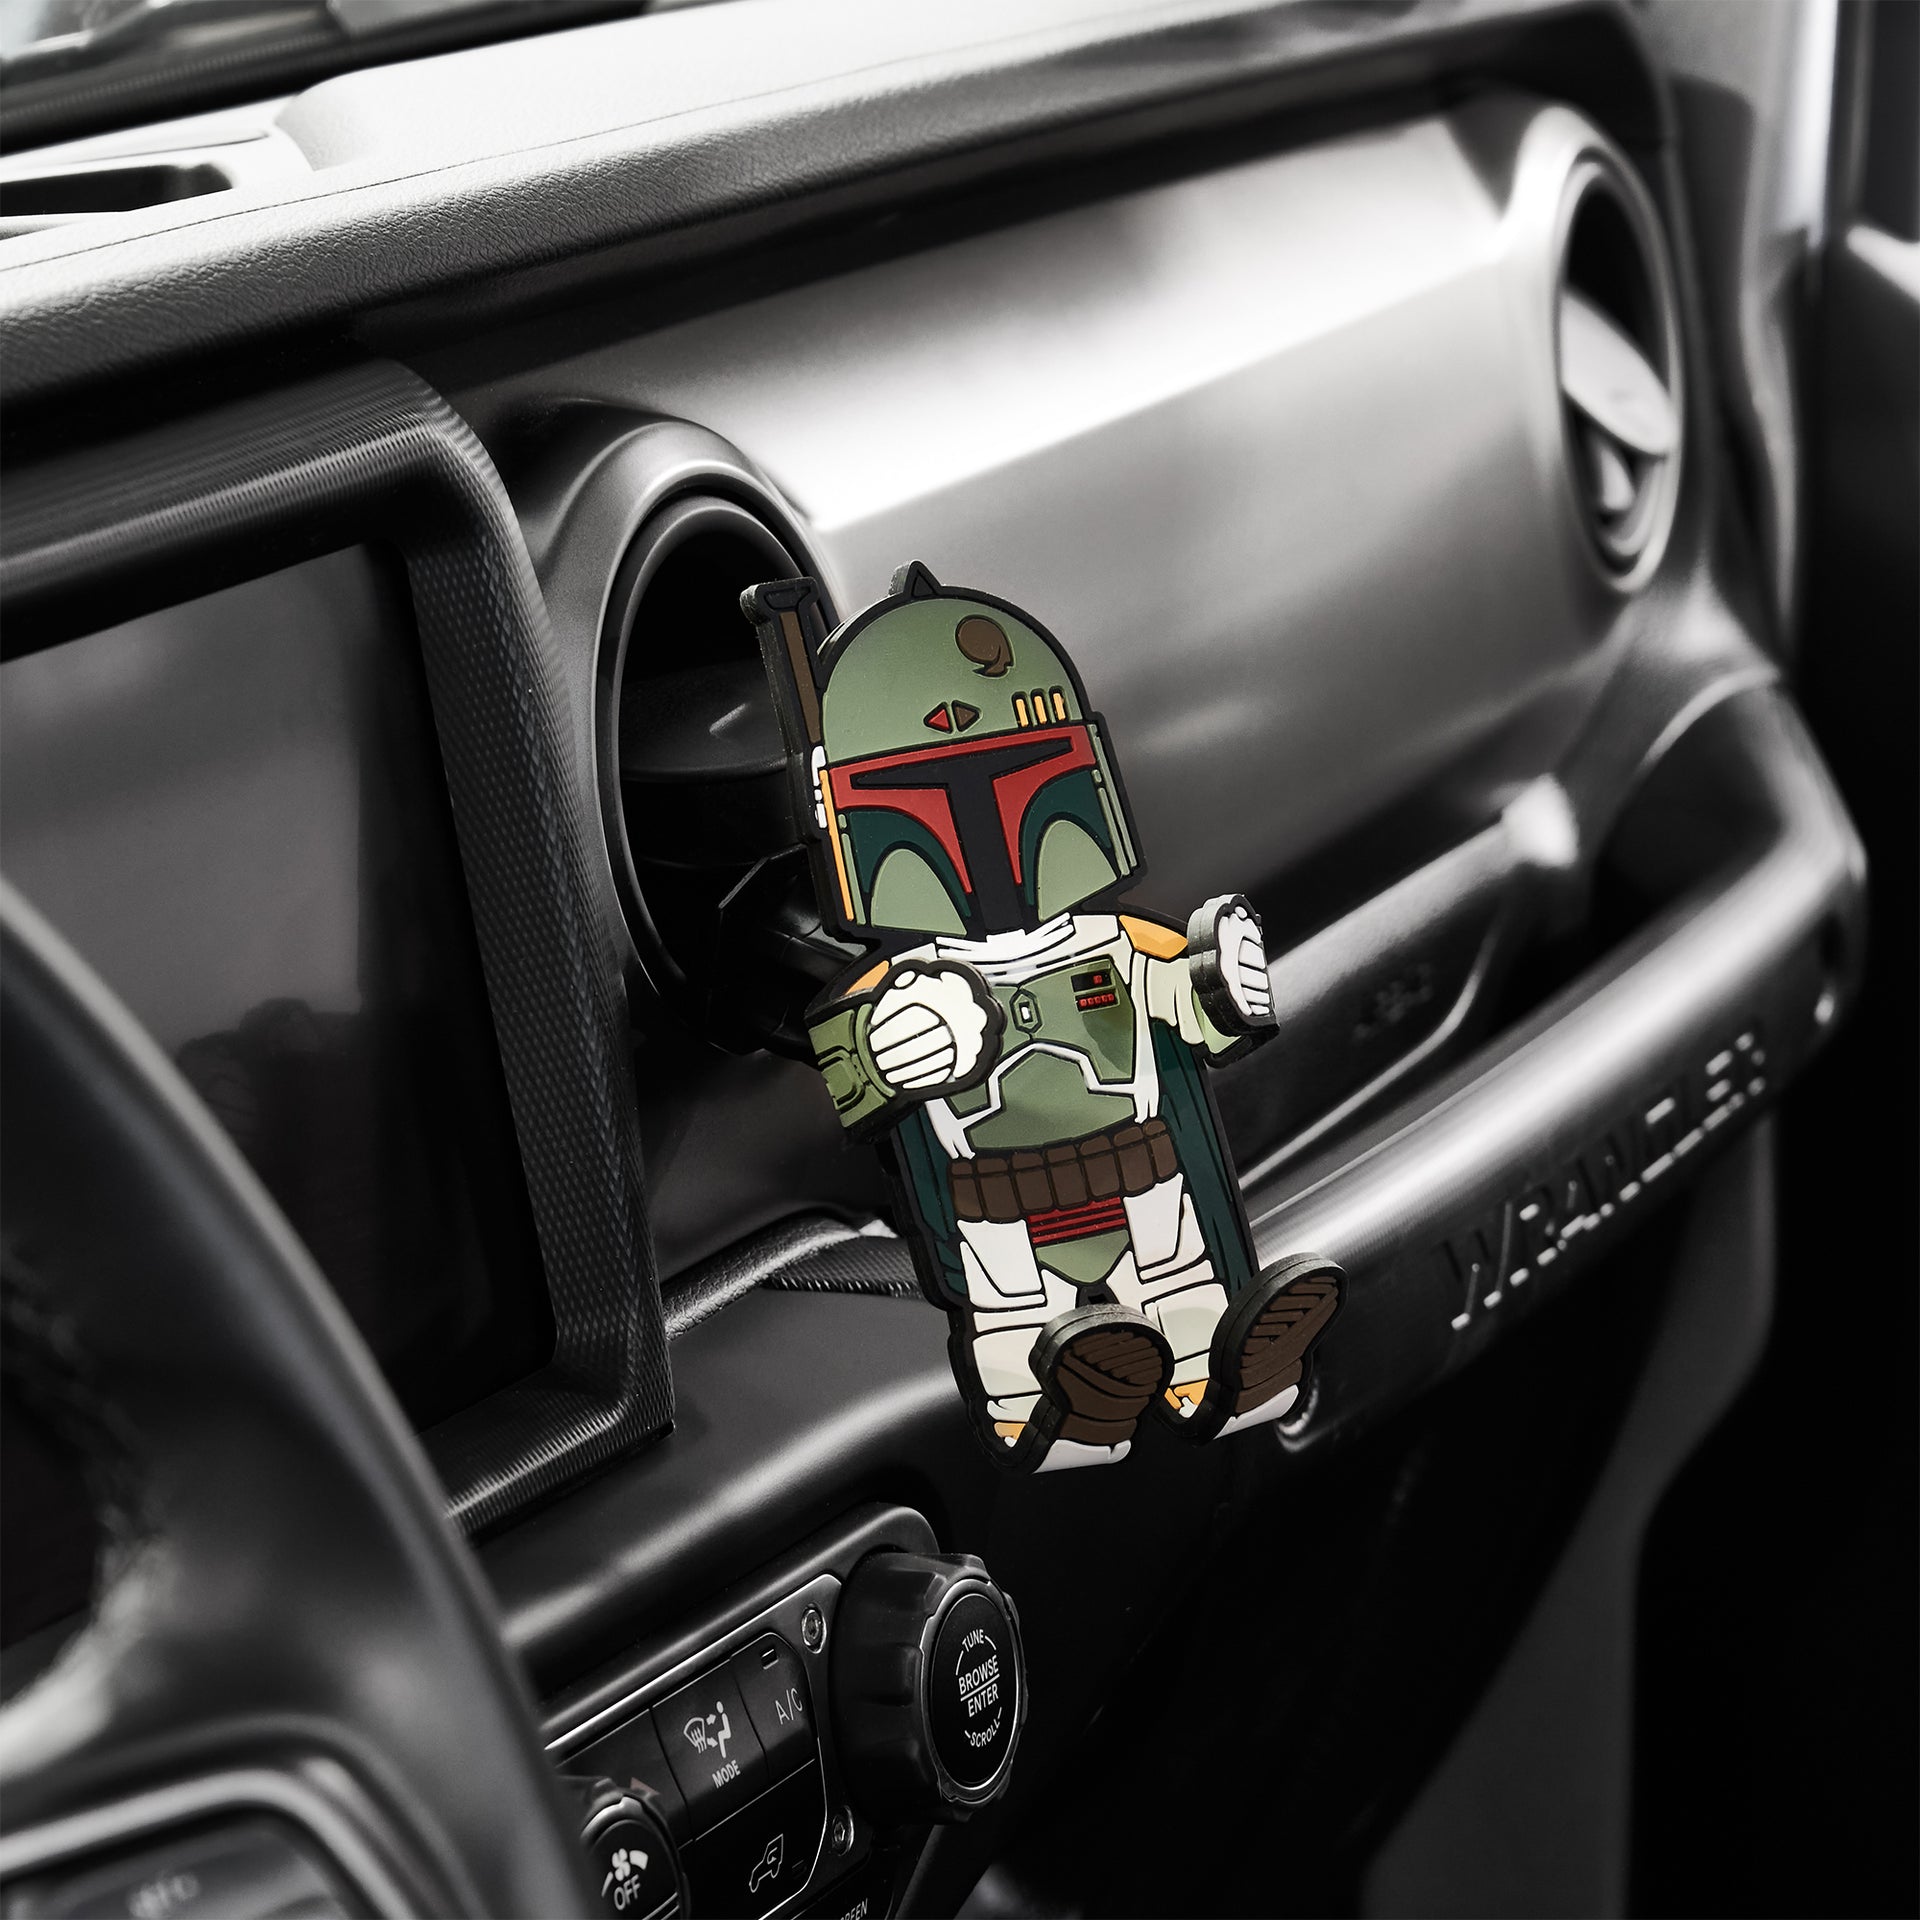 Image of Star Wars Boba Fett Hug Buddy attached to a vehicle air vent waiting to hold a phone or smart device on your next journey!